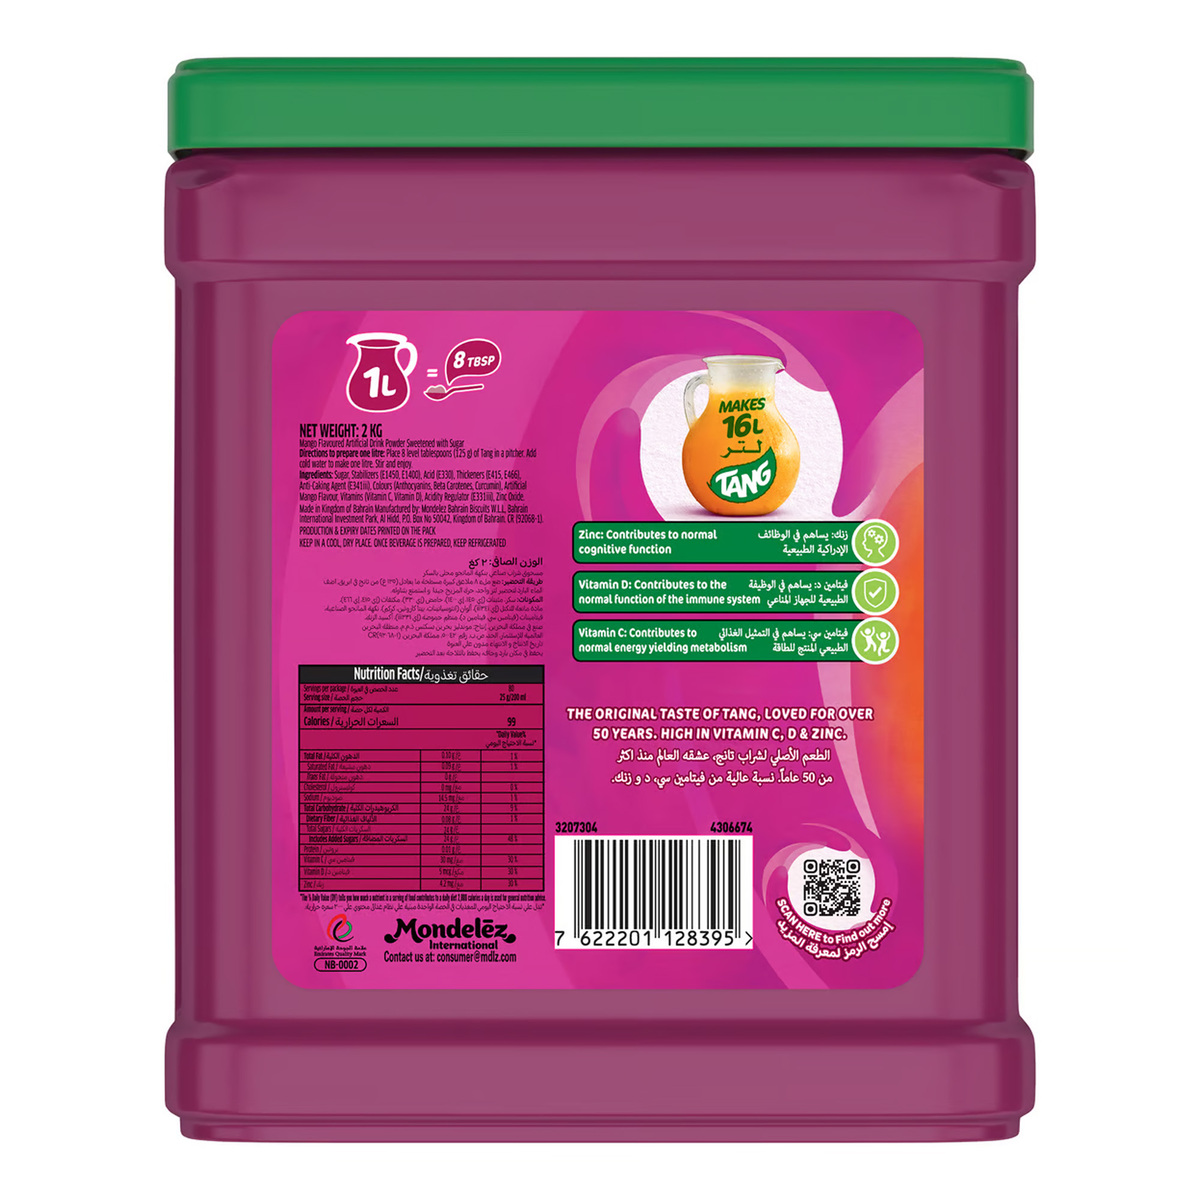 Tang Mango Instant Powdered Drink Value Pack 2 kg